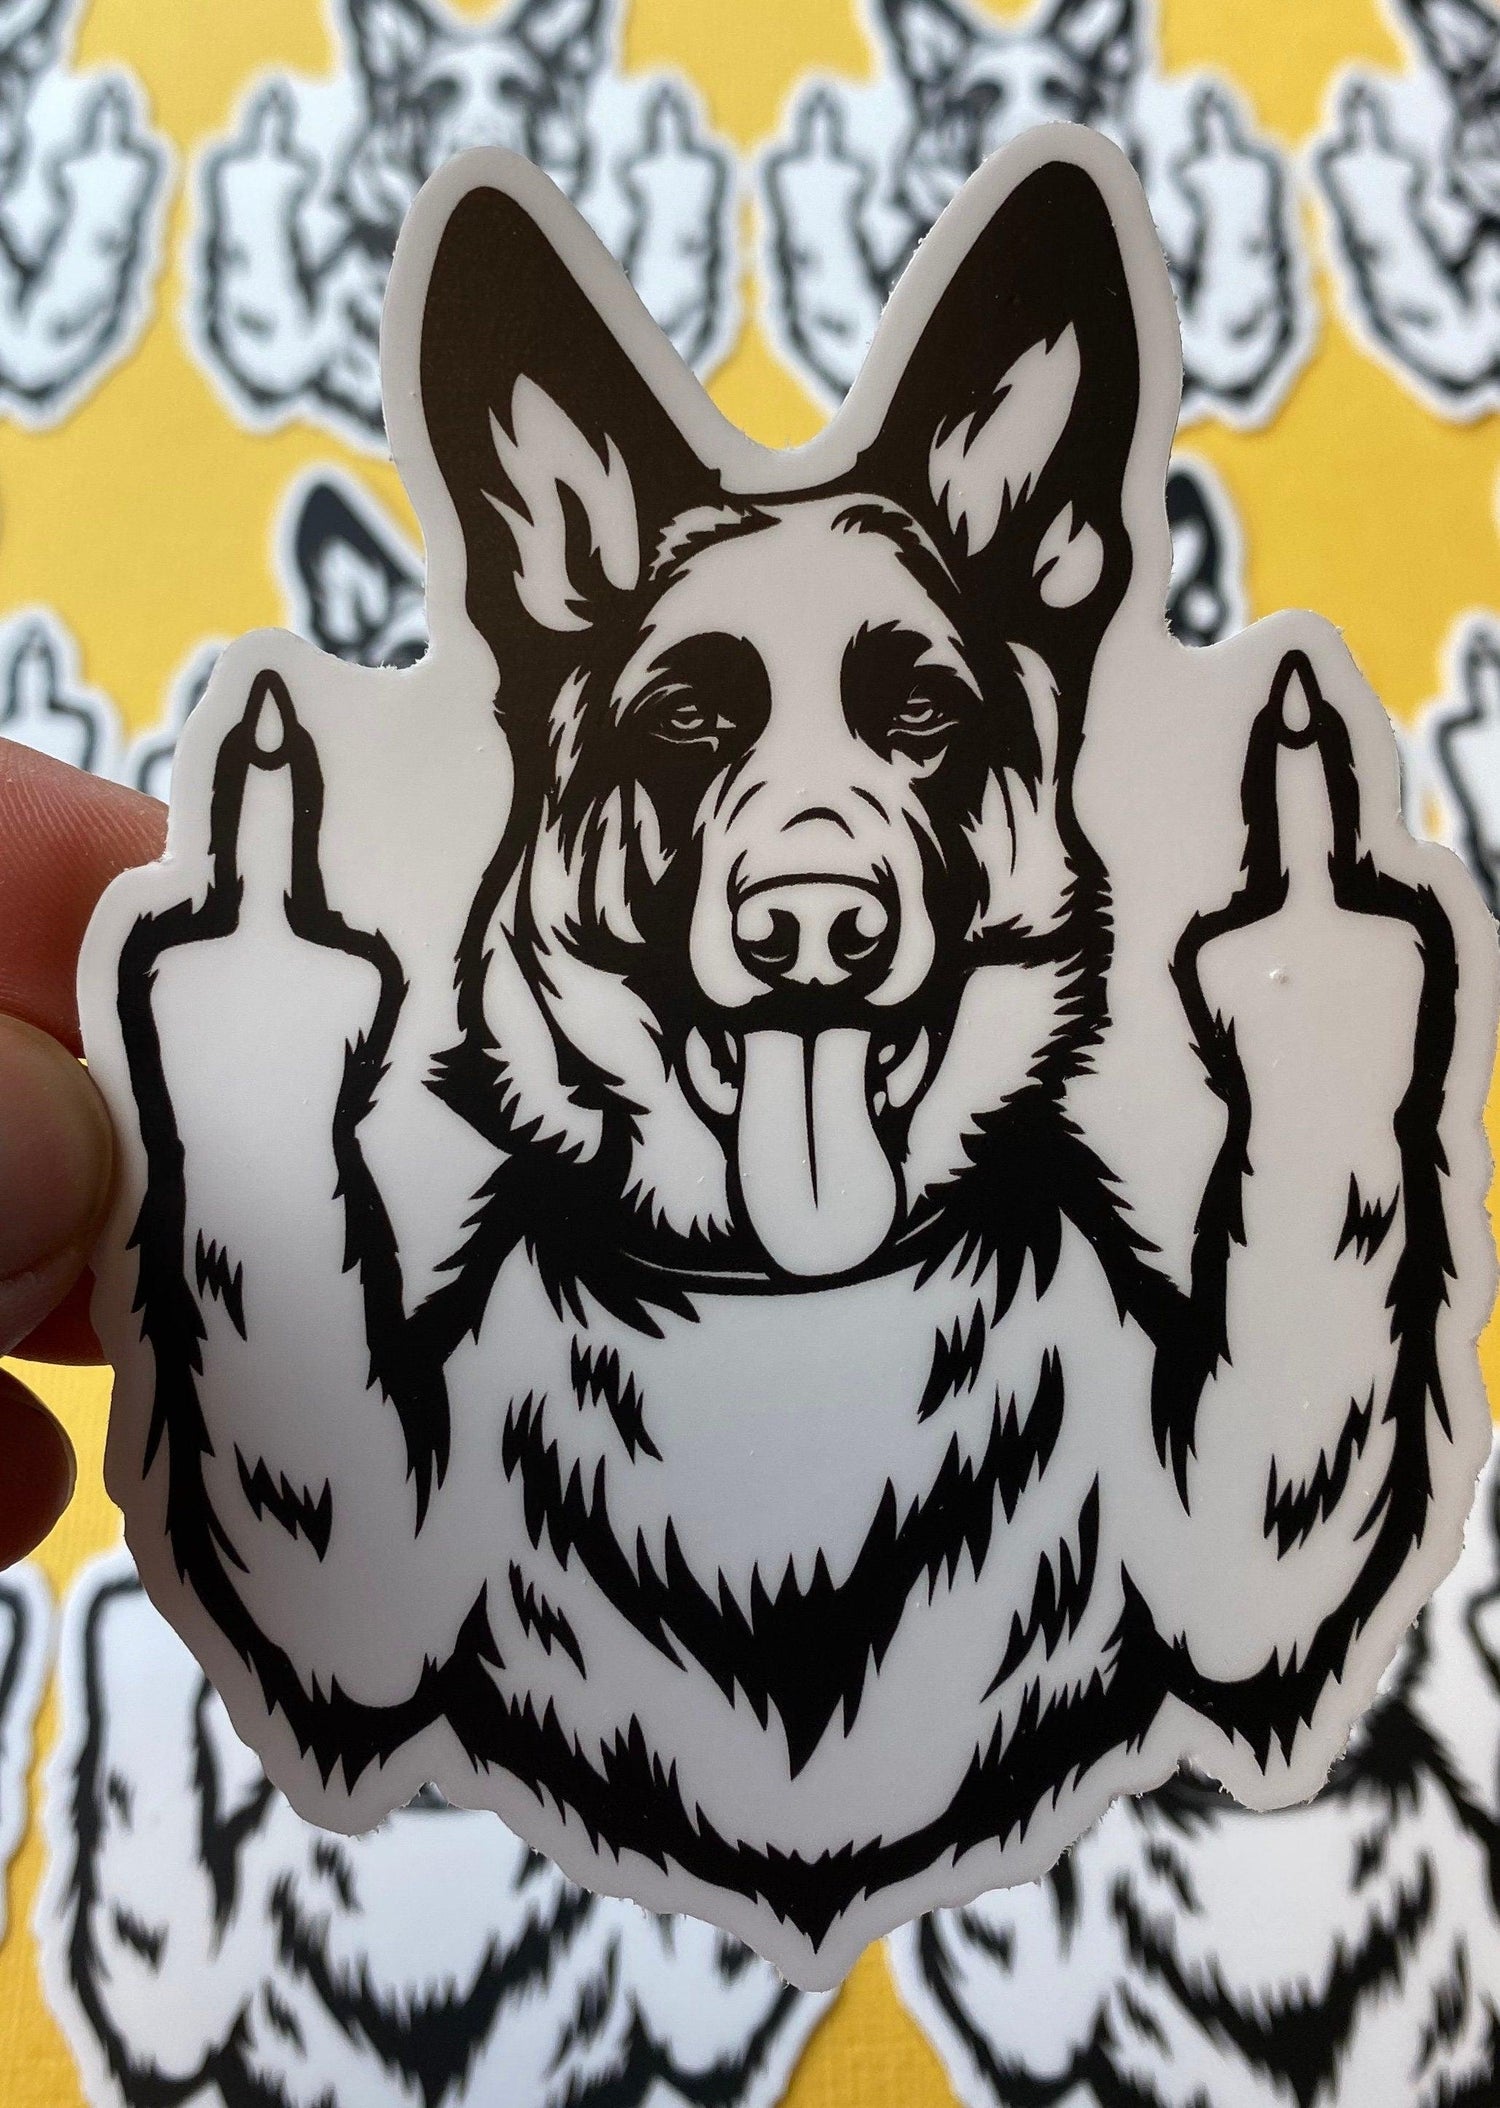 K9 German Shepherd Middle Finger Sticker, Funny Sticker for Police K9 Handler, Military K9, Schutzhund, GSD Owners, GSD Car Decal - Ottos Grotto :: Stickers For Your Stuff